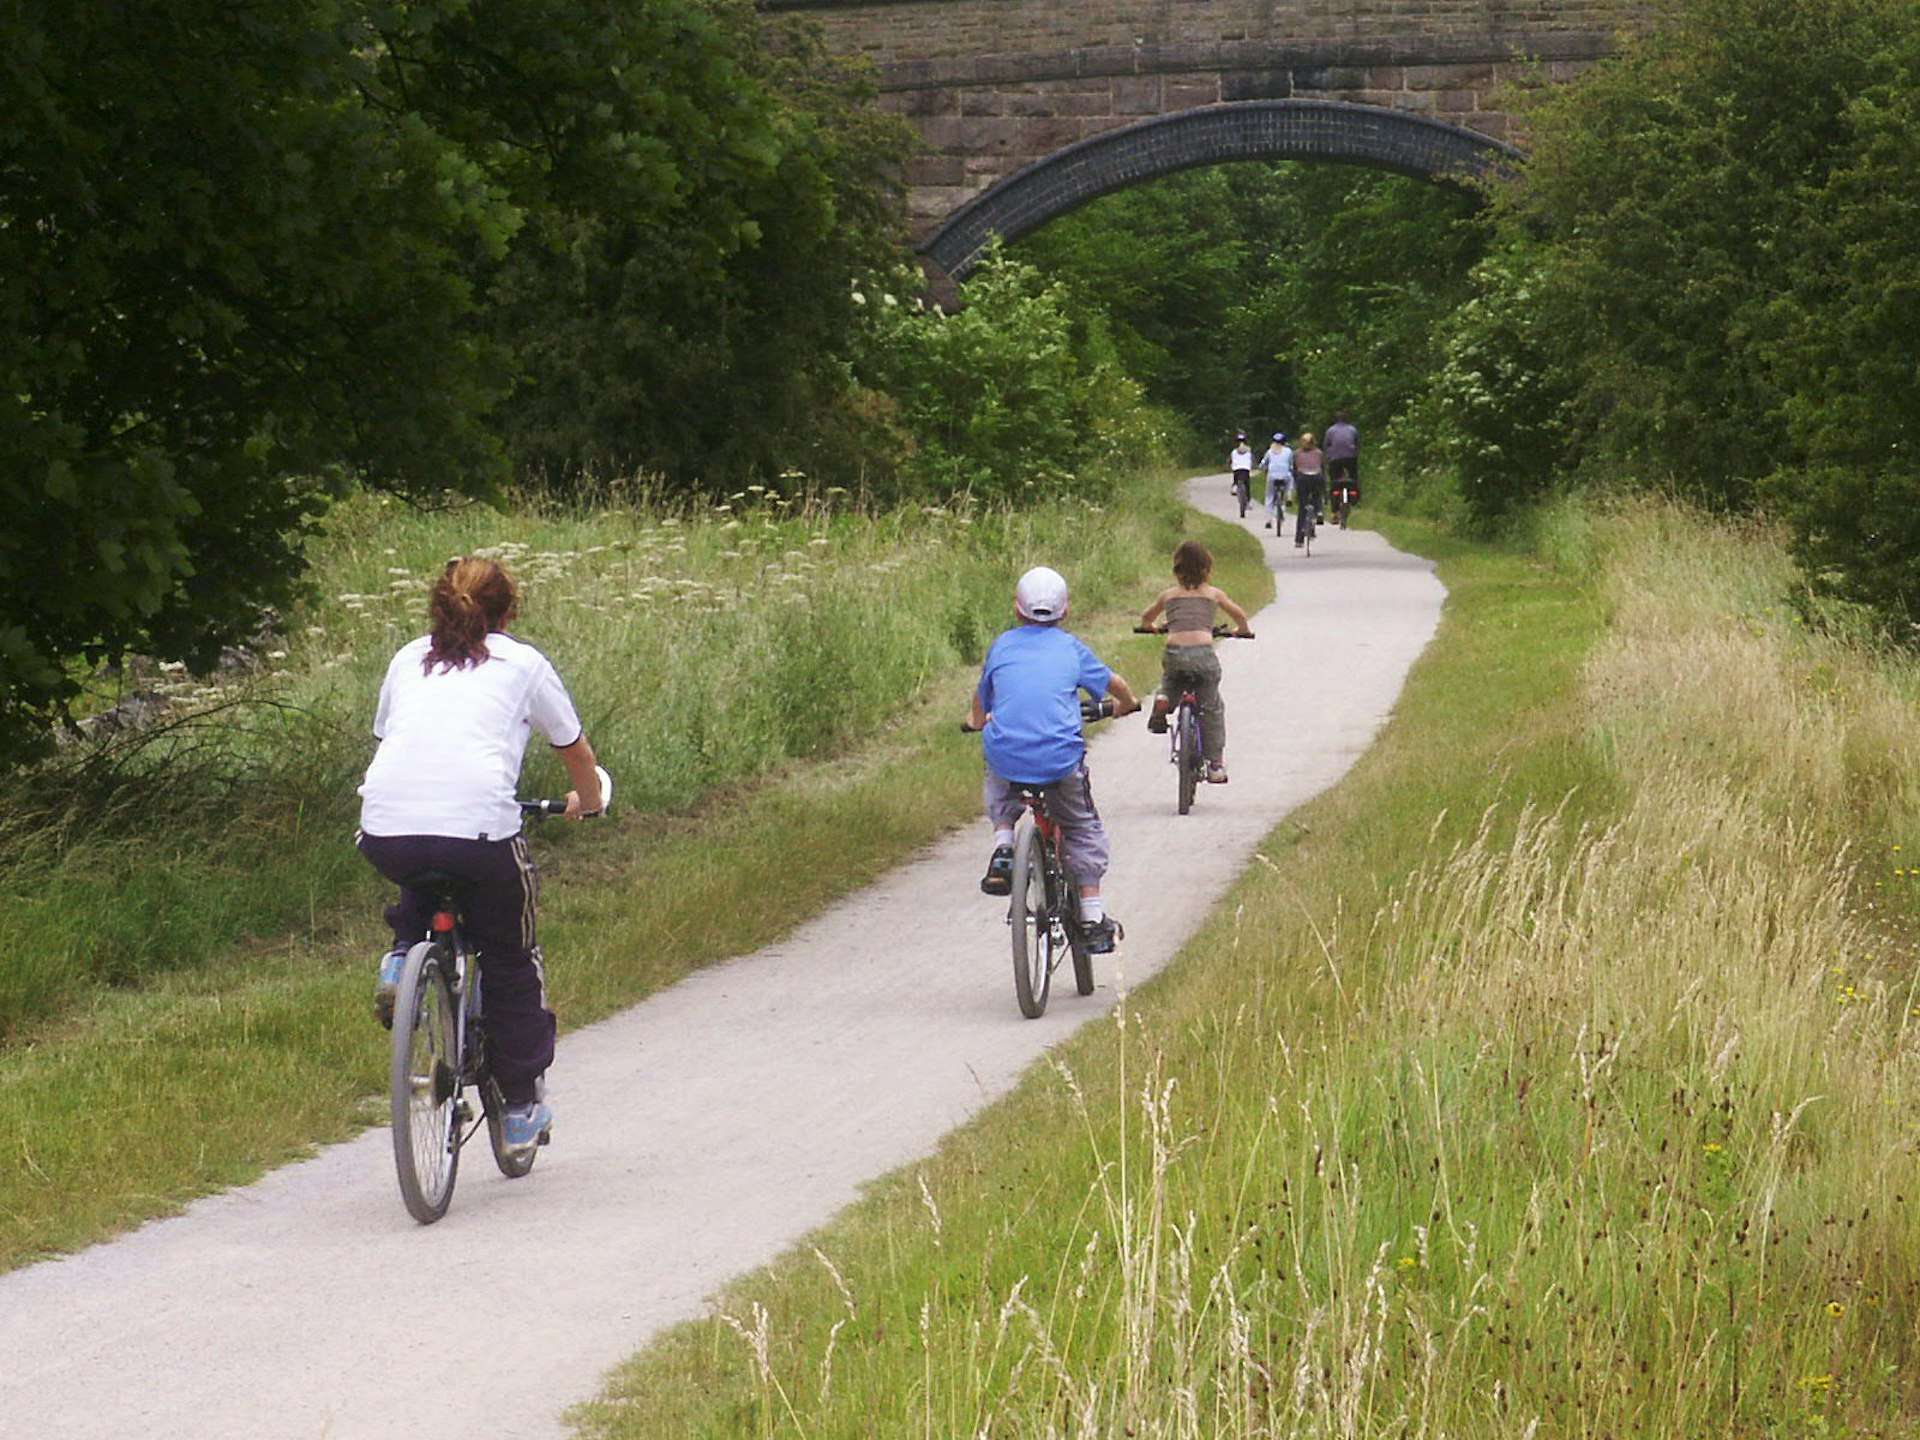 Family cycling on a trail surrounded by grass. There is an arched railway bridge up ahead in the distance